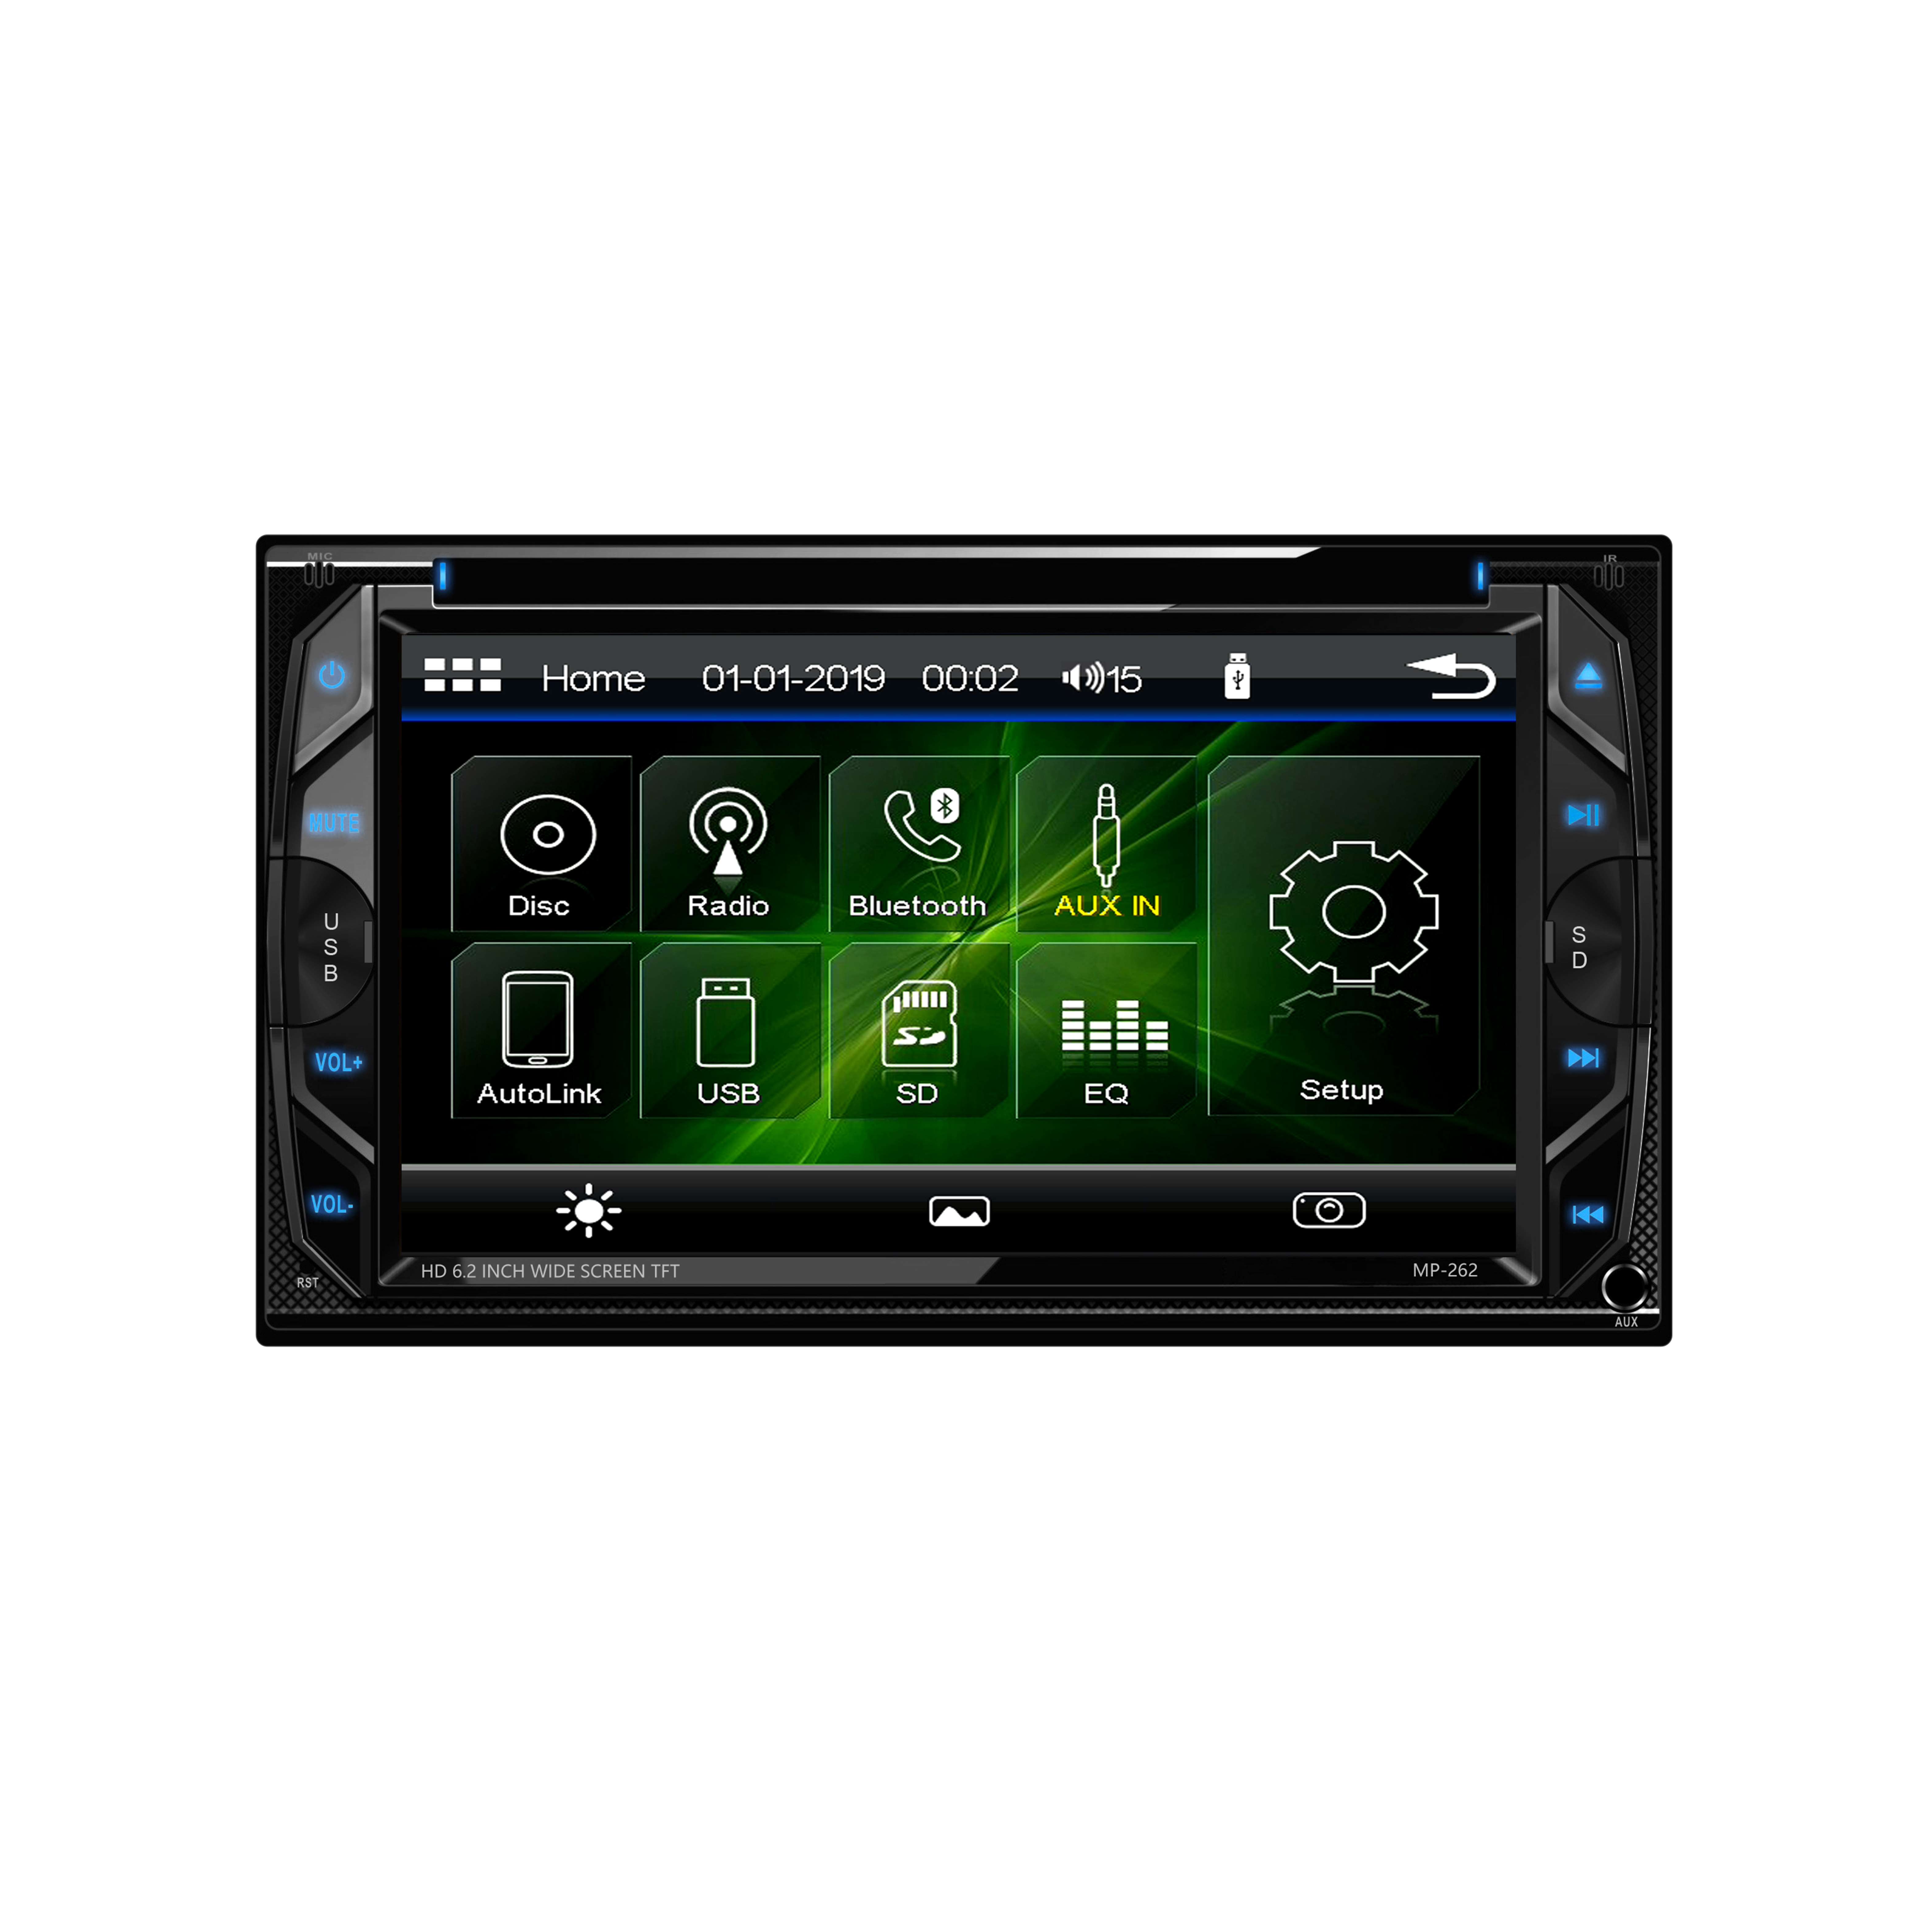 Dual Pouch Screen Radio Double Din Car DVD Bluetooth Audio/Hands-Free Calling 6.2 Inch Pekskärm LCD Monitor, MP3 Player, CD, DVD, USB Port, SD, AUX Input, AM/FM Radiomottagare